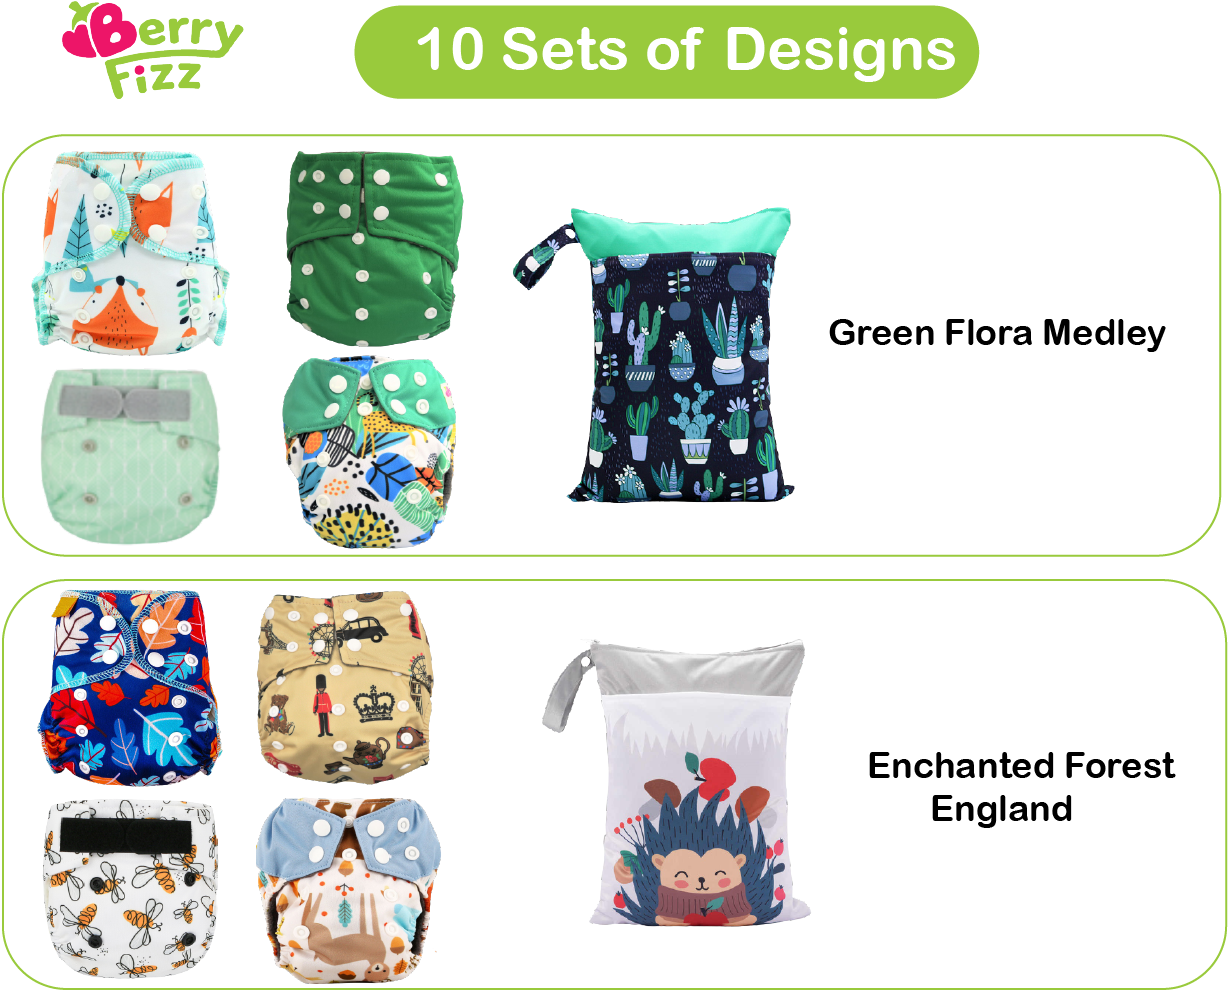 14pc Pack Full Set Newborn Cloth Diaper Pocket & All-In-One AIO, Wet bag, Liner